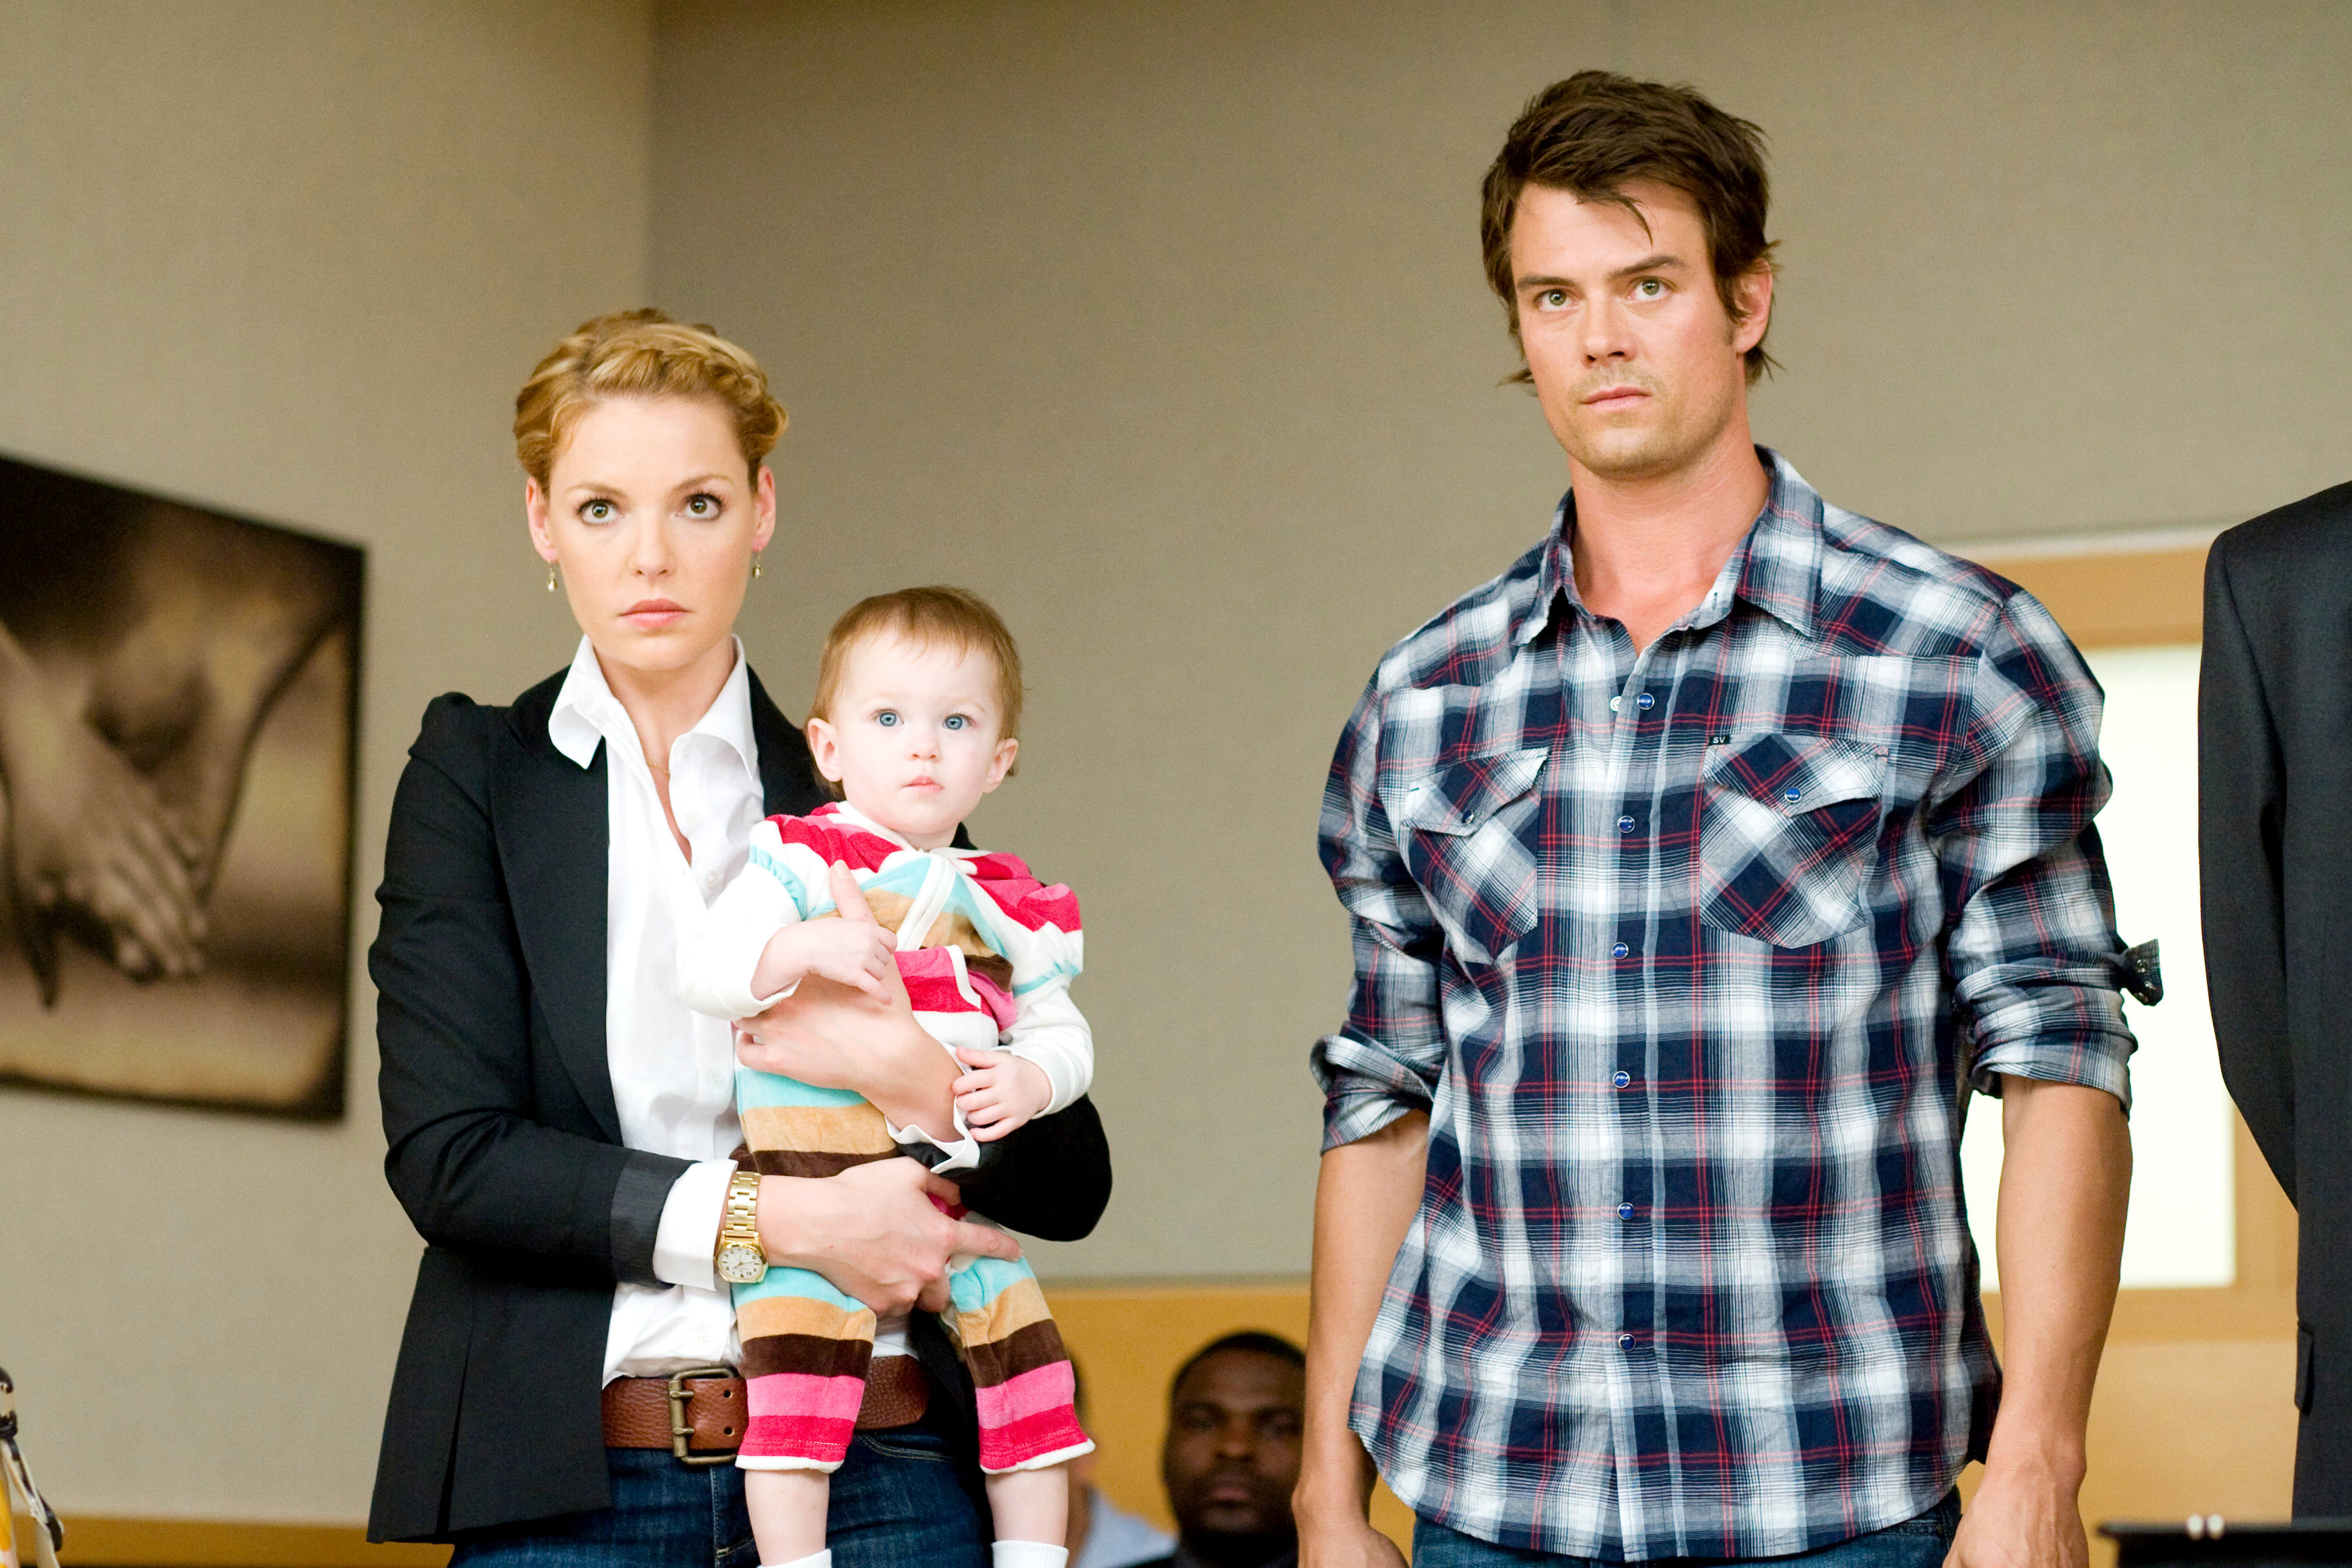 Katherine Heigl stars as Holly Berenson and Josh Duhamel stars as Eric Messer in Warner Bros. Pictures' Life as We Know It (2010)